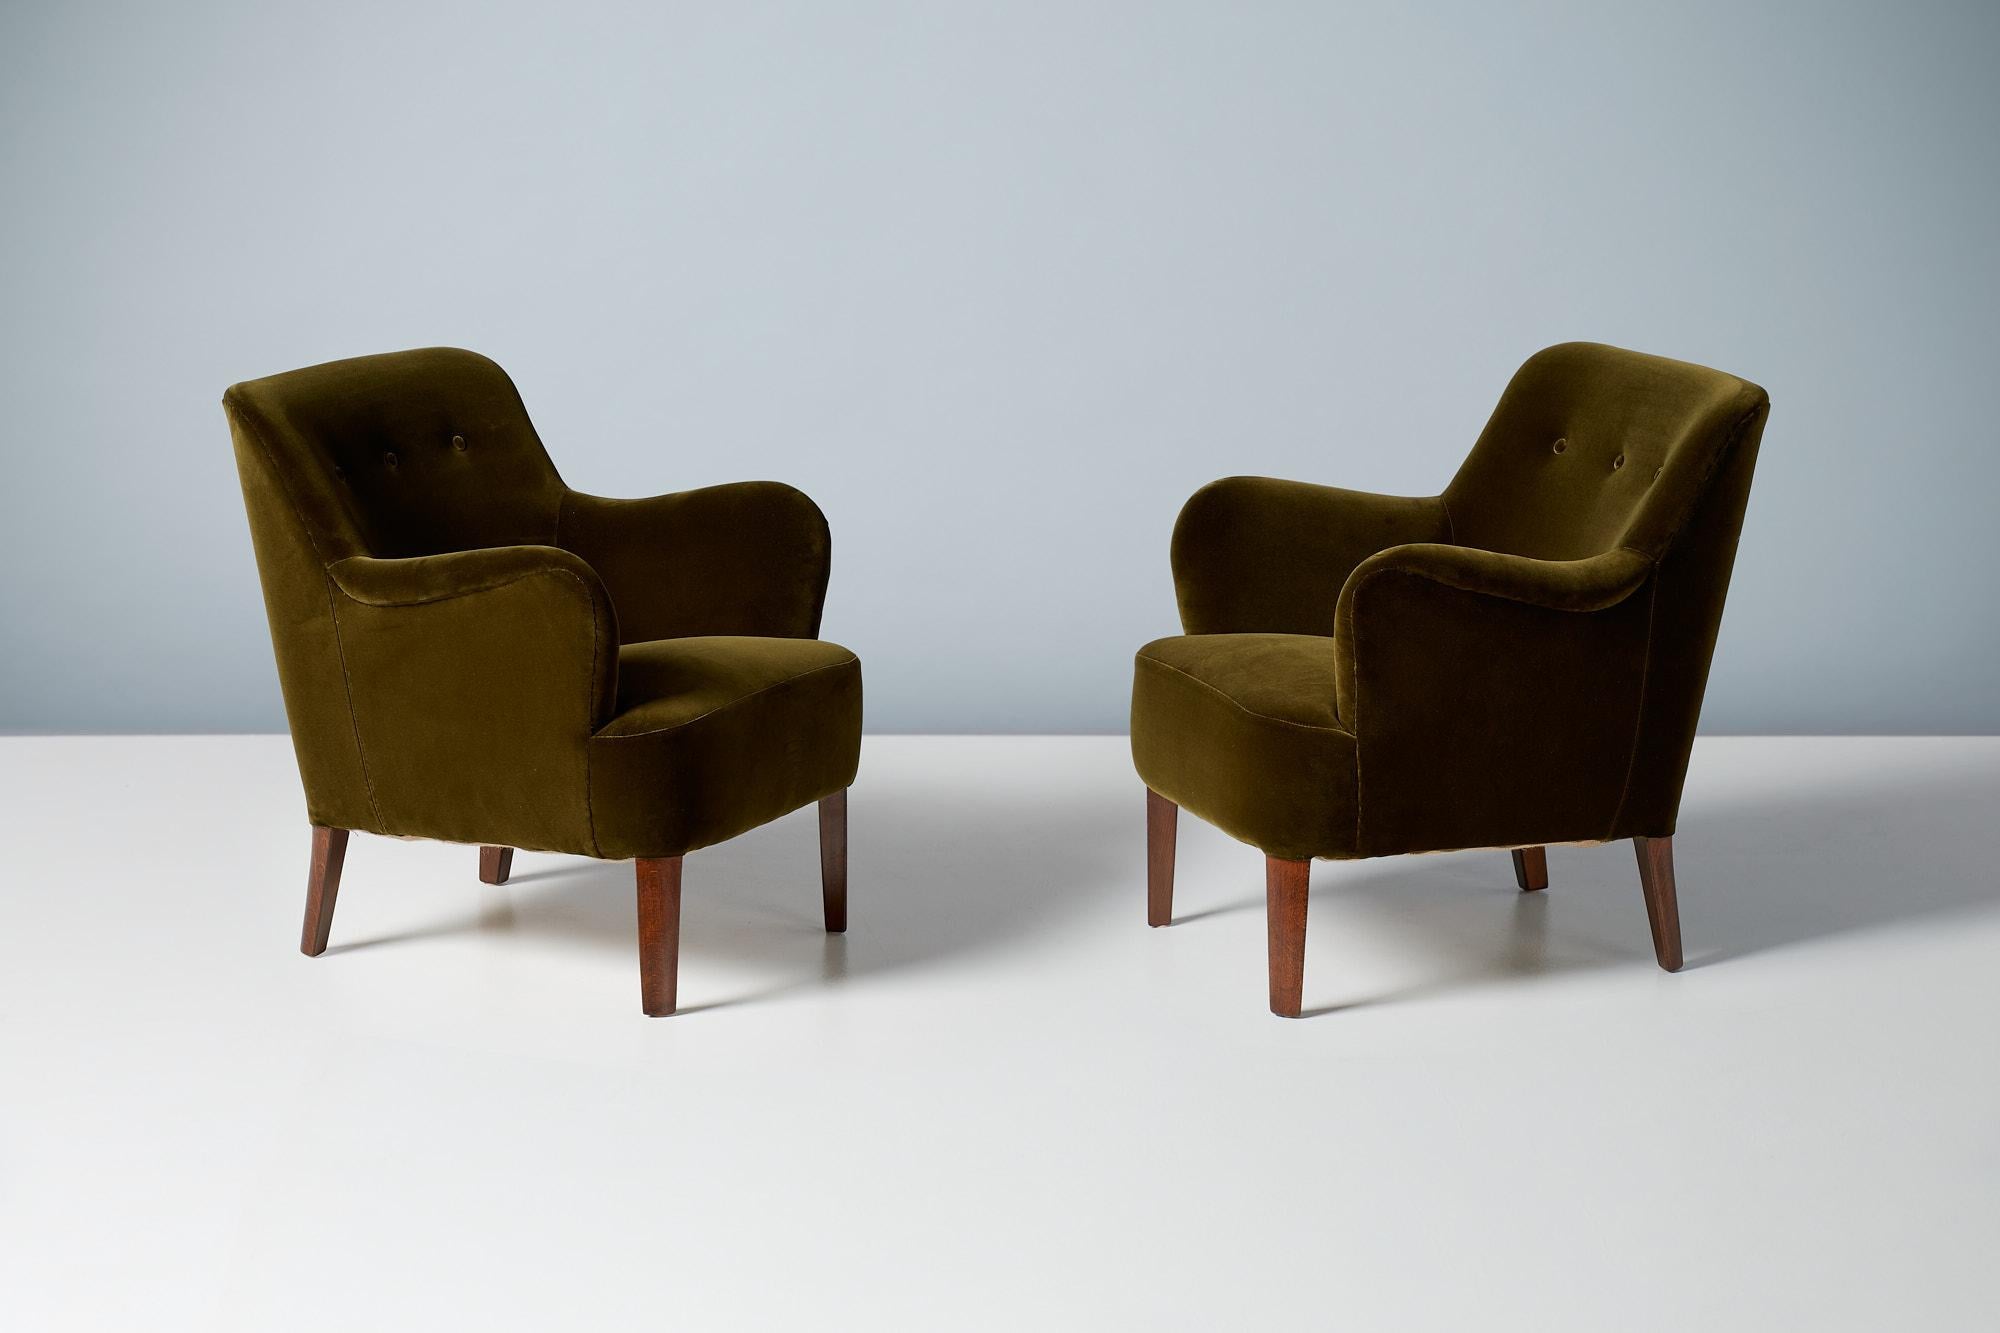 Peter Hvidt - Model 1748 Lounge Chairs, circa 1940s.
These elegant low-back lounge chairs were produced by Fritz Hansen in Denmark in the late 1940s by master designer Peter Hvidt. The beech legs have been walnut-stained and both chairs have been